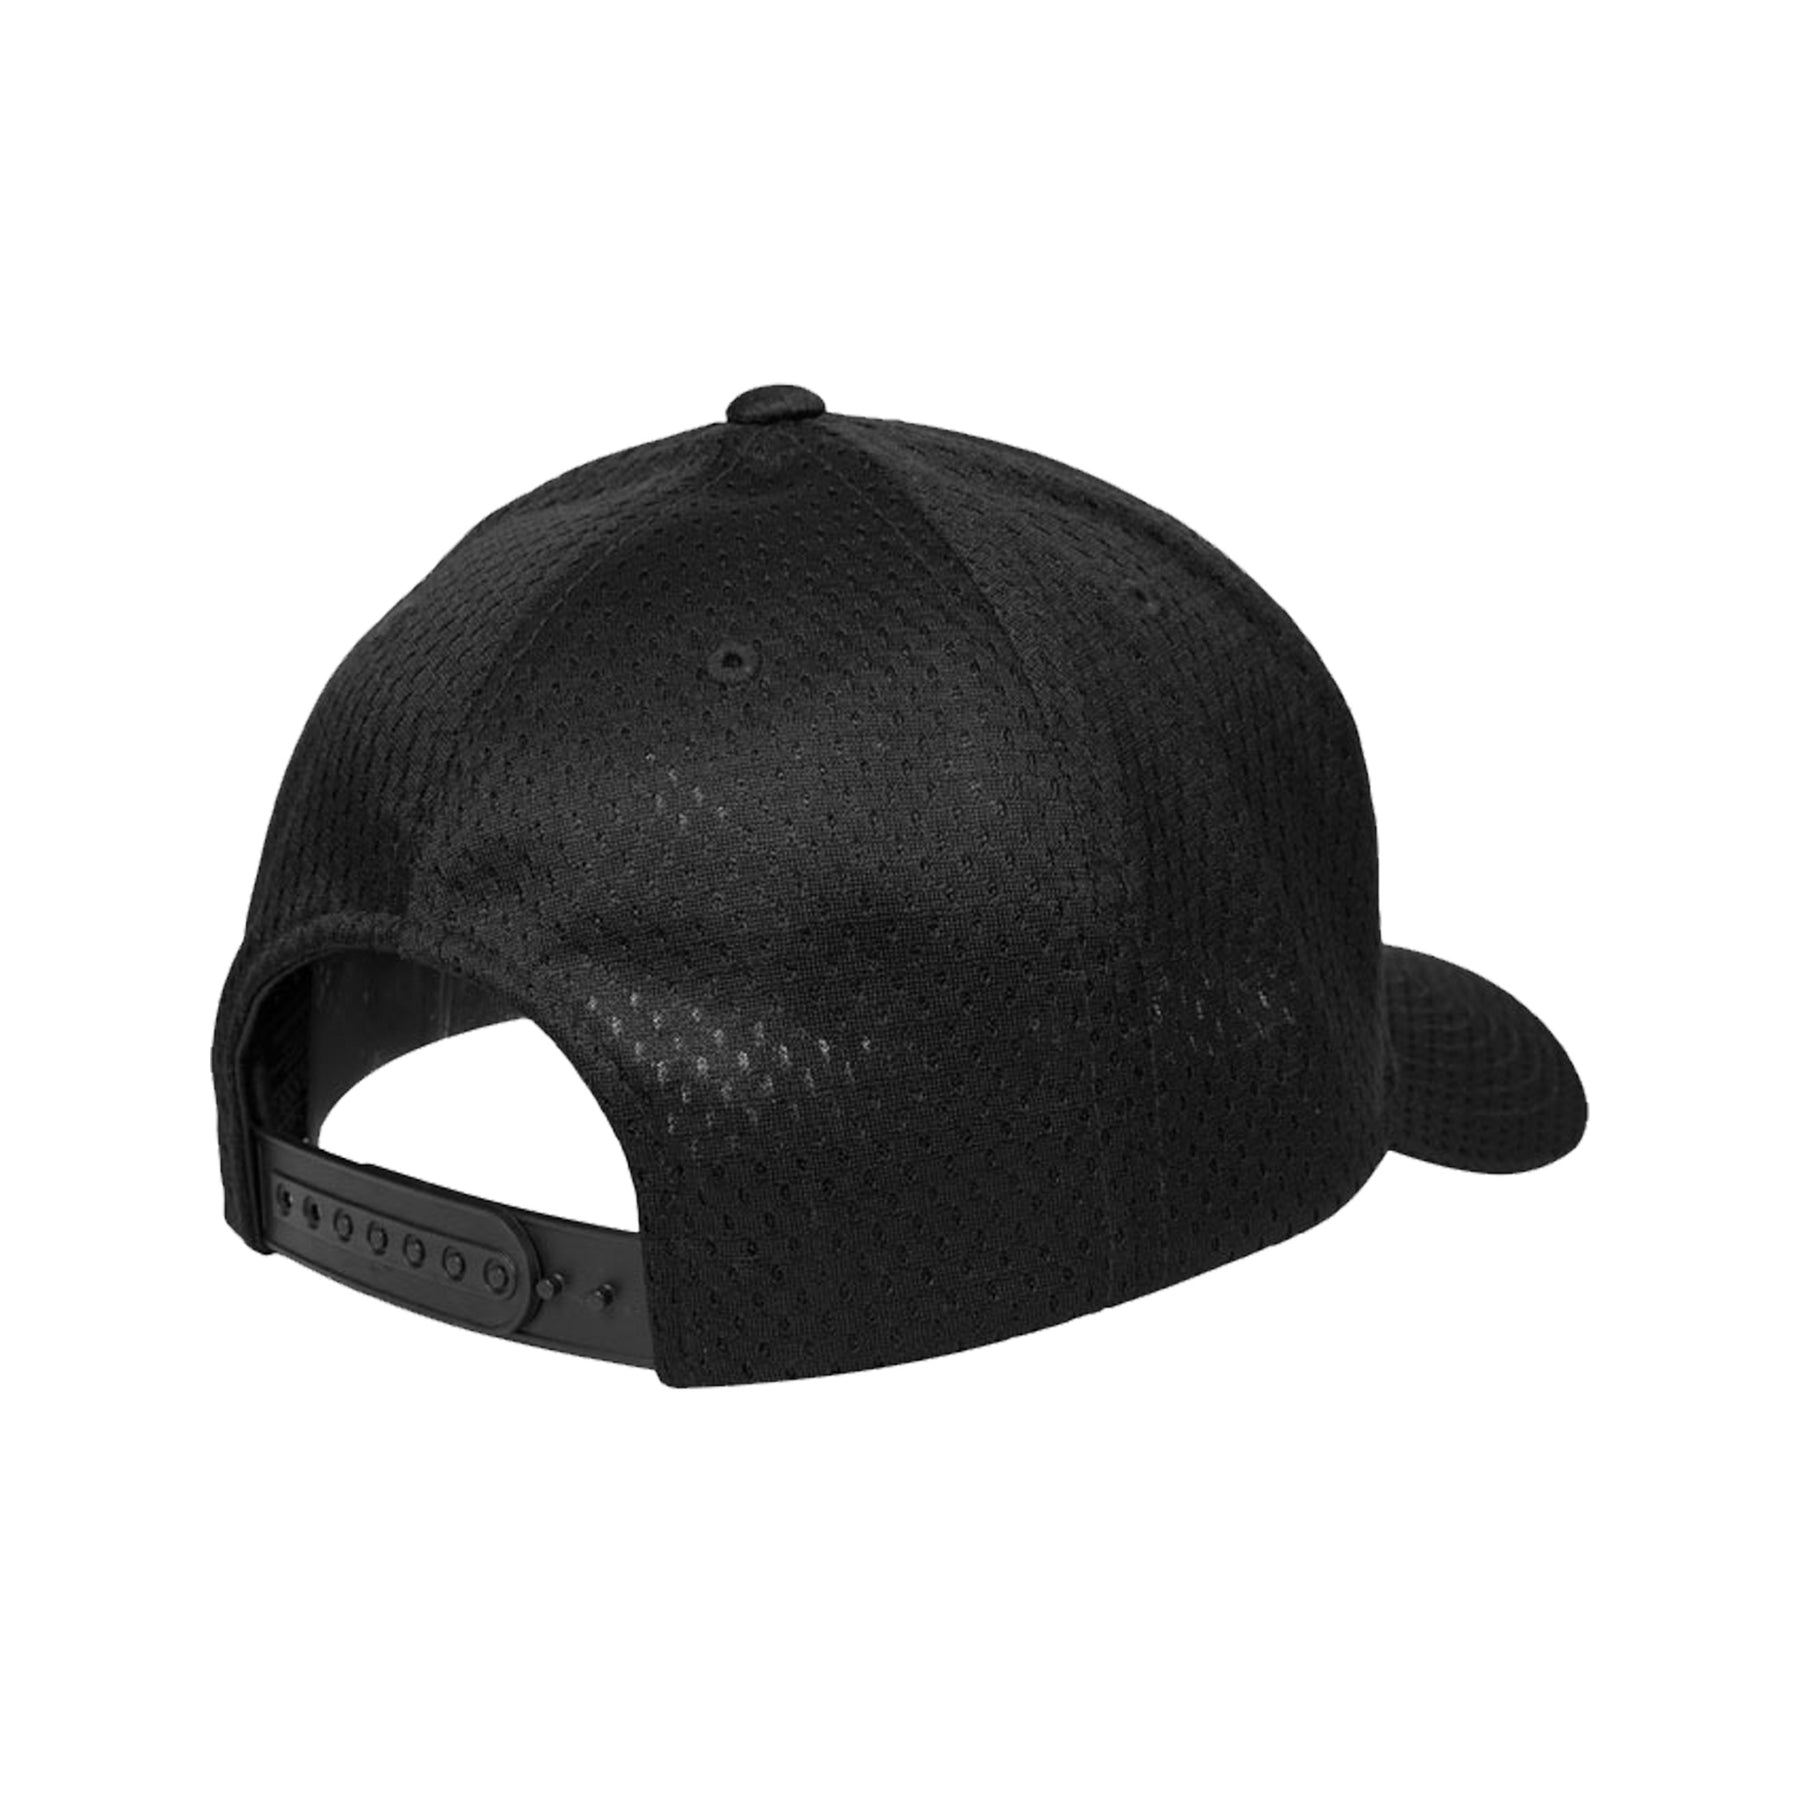 yupoong sports cap in black